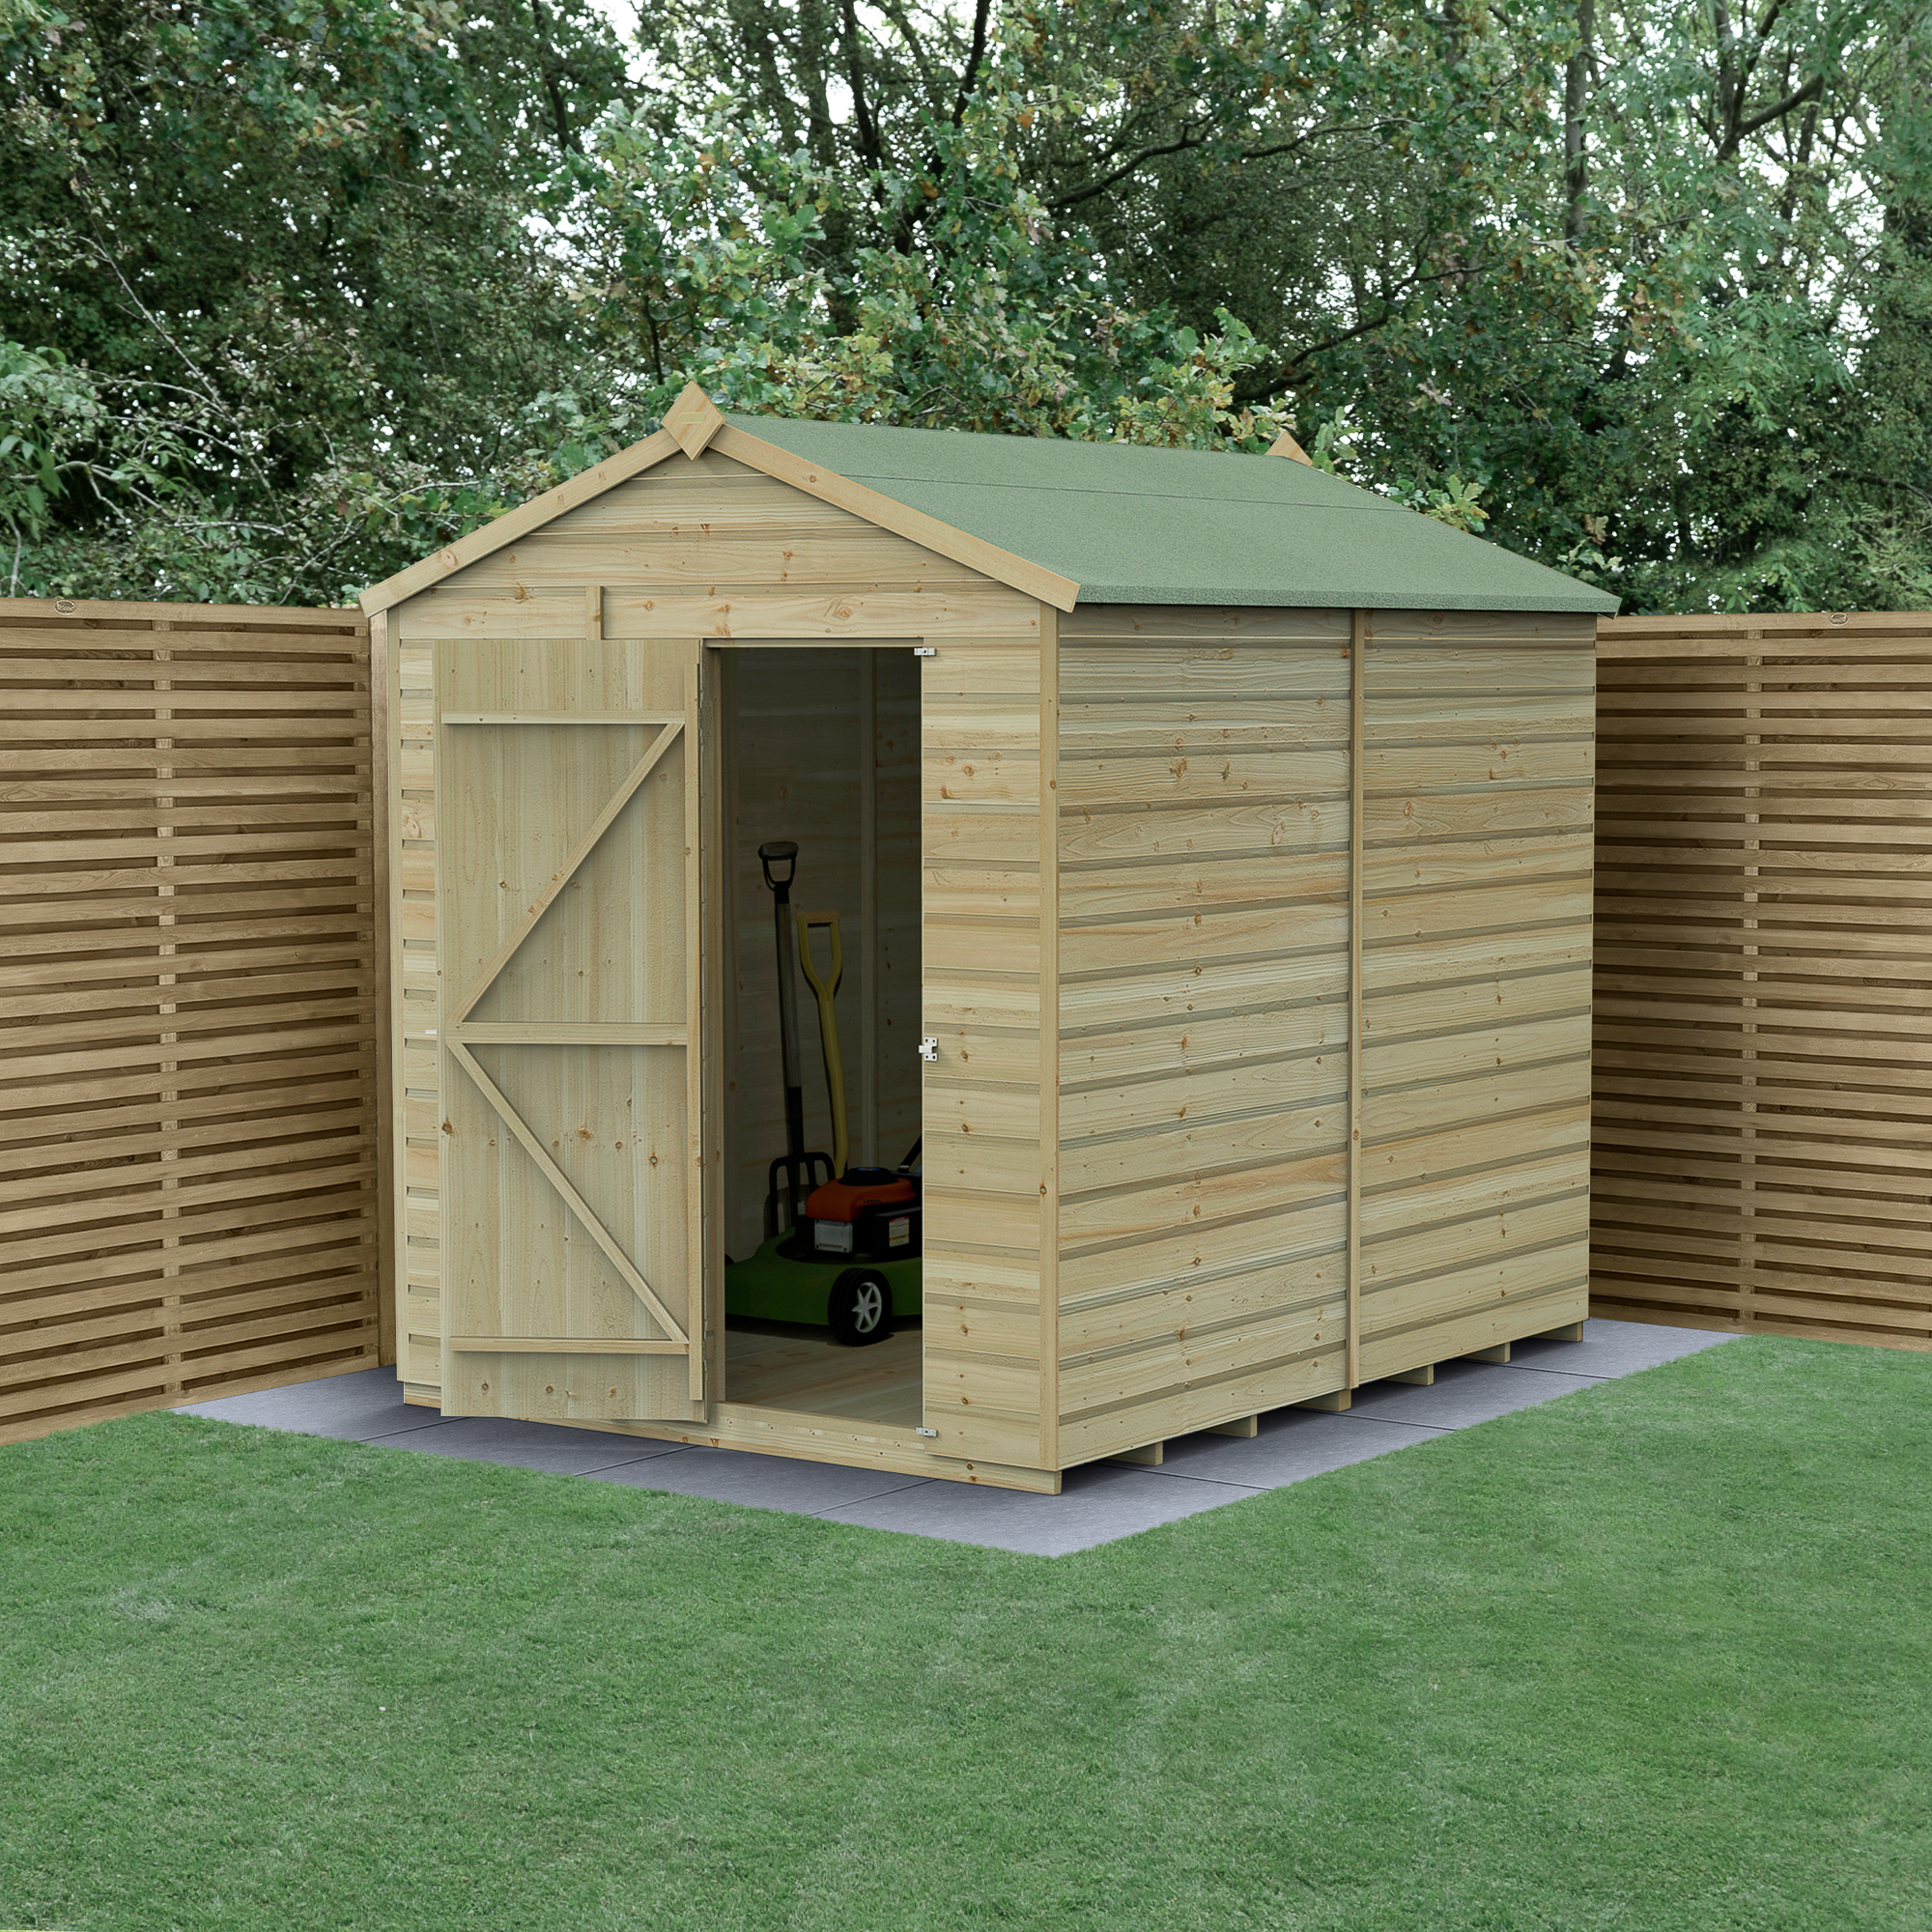 Forest Garden Beckwood 6 x 8ft Apex Shiplap Pressure Treated Windowless Shed